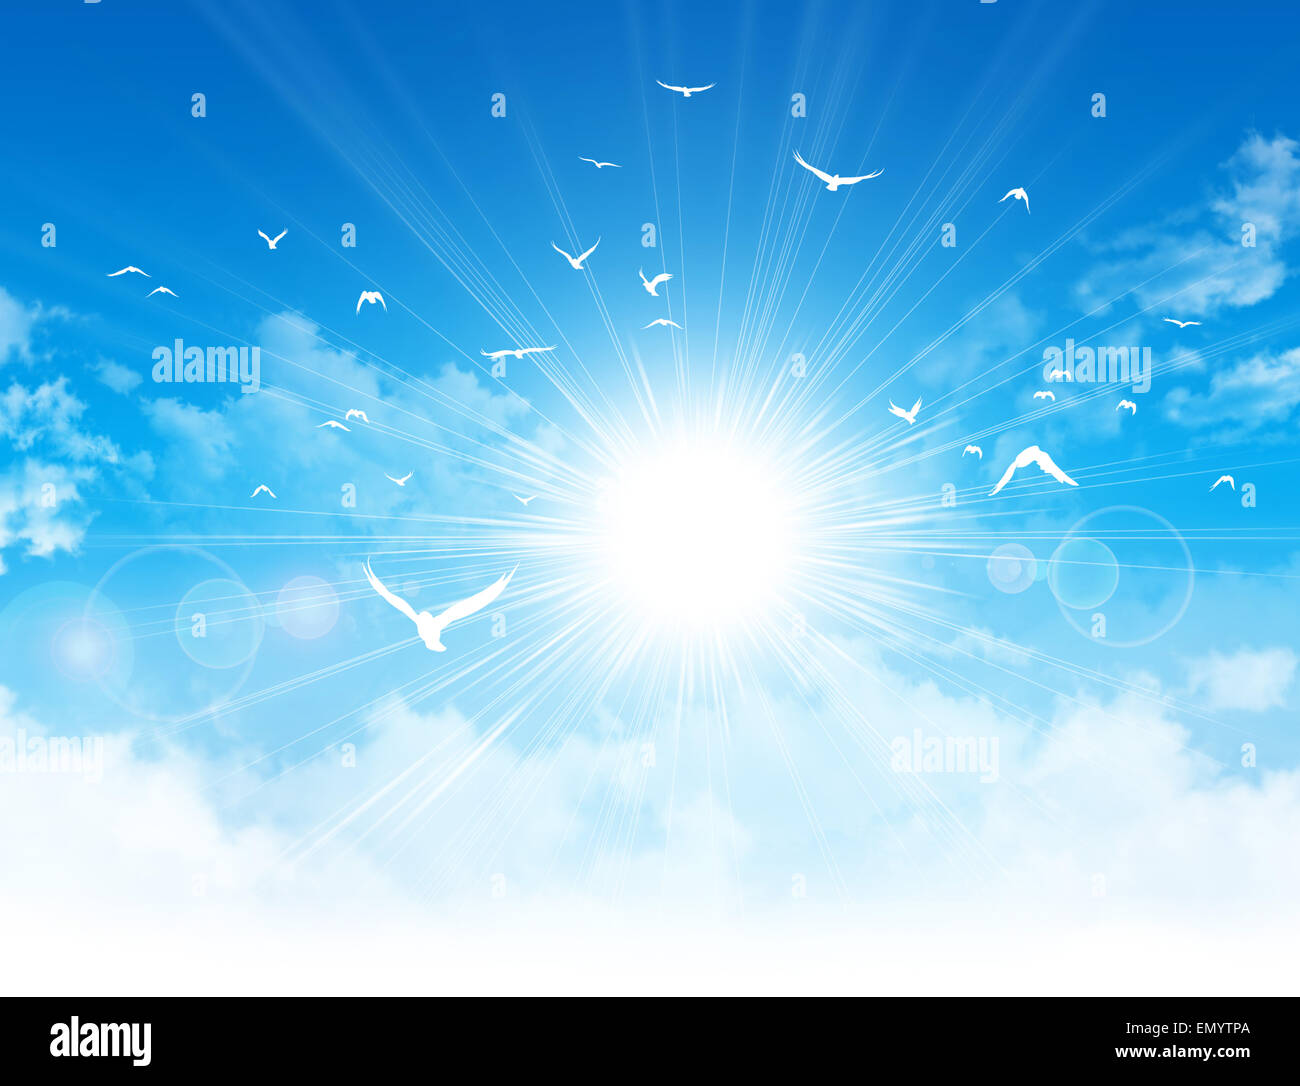 Freedom flight. White birds flight in front of the sunshine in a cloudy blue sky Stock Photo